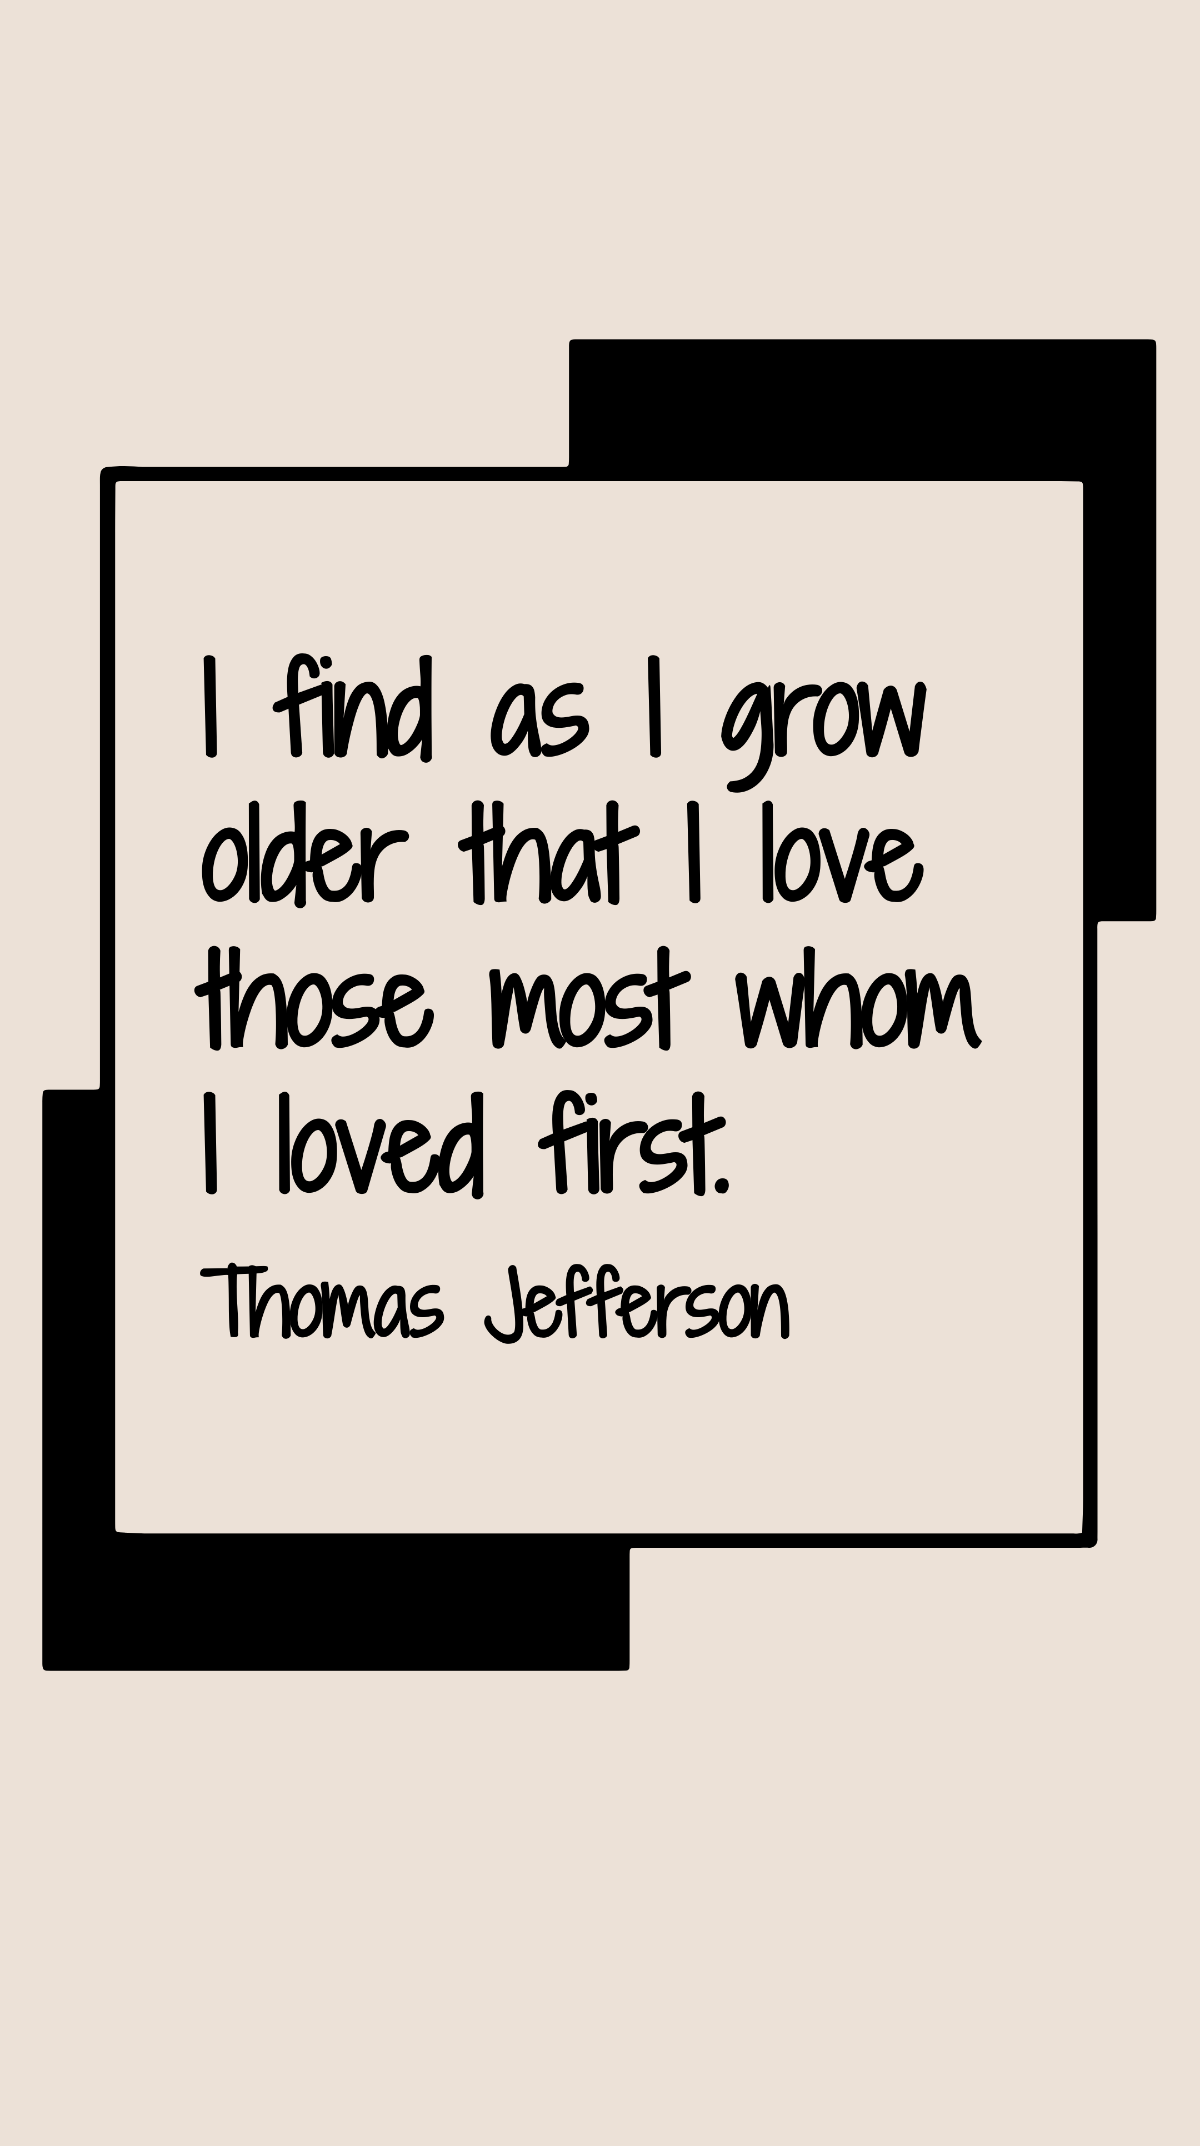 Thomas Jefferson - I find as I grow older that I love those most whom I loved first. Template